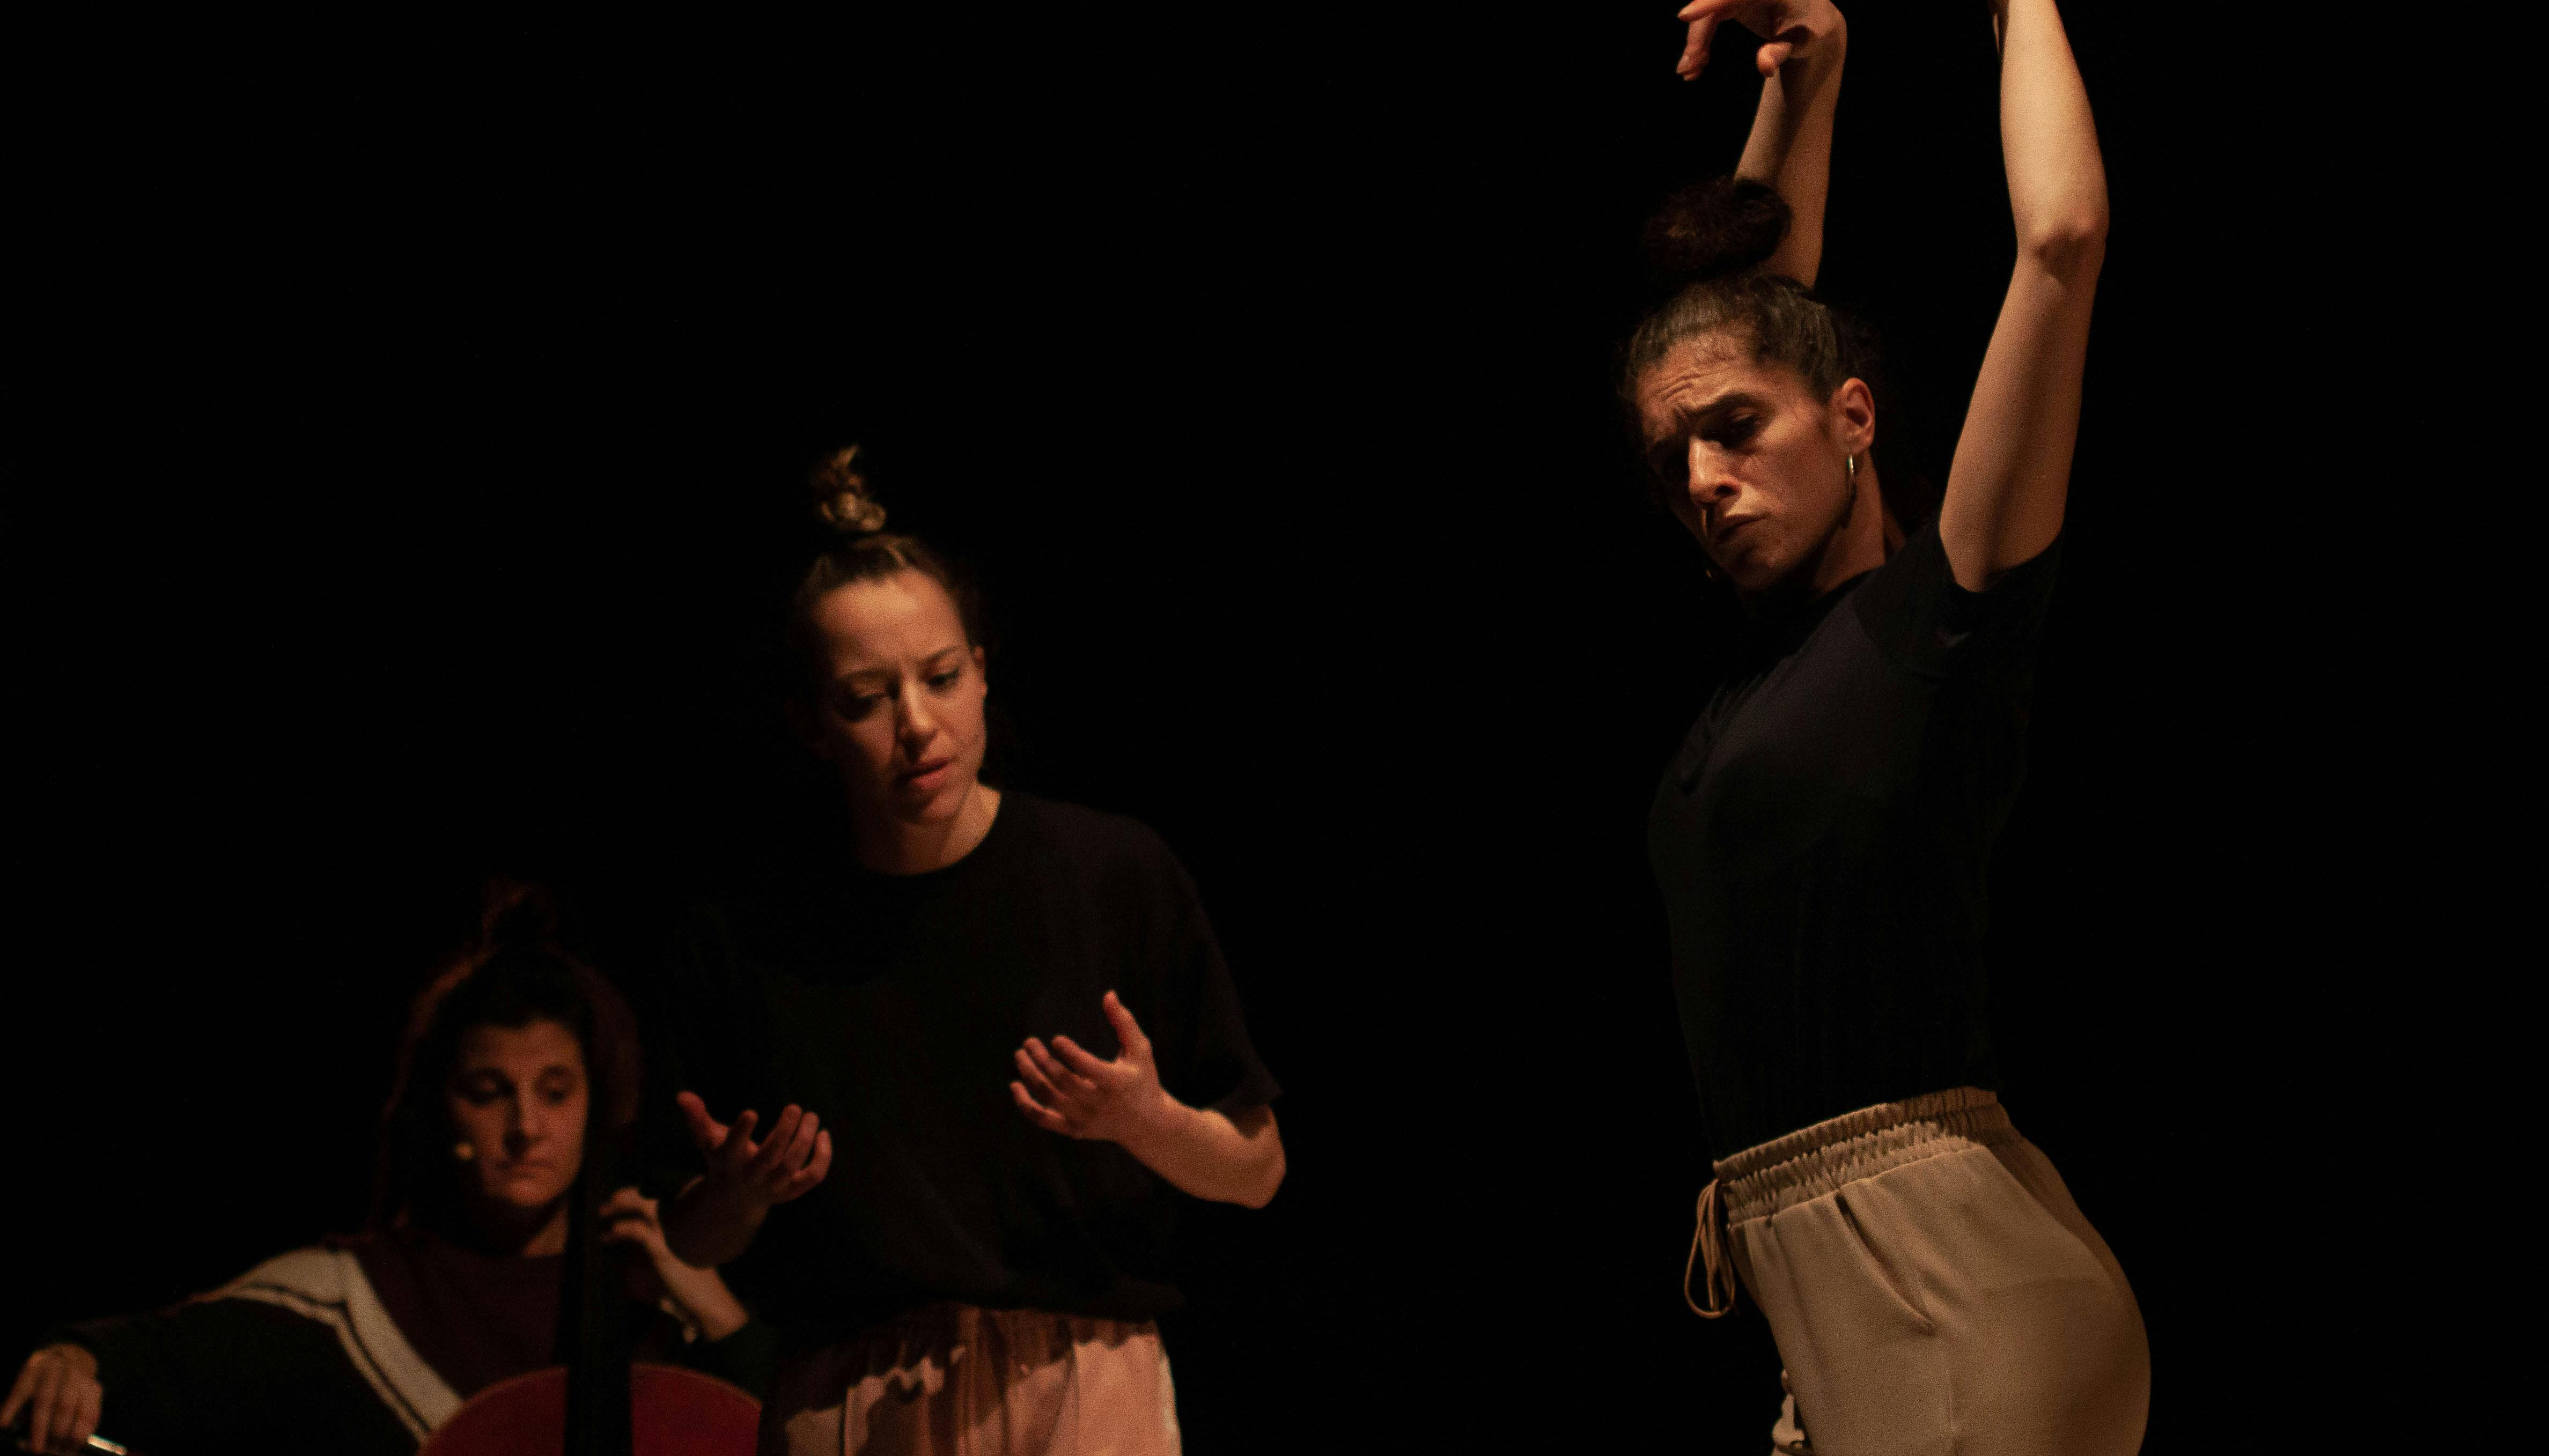 Three performer in rehearsal. In the foreground a dancer with her arms raised upward and her back slightly arched; just behind a second dancer with her hands raised to chest height. In the back a cellist, seated, plays her instrument.